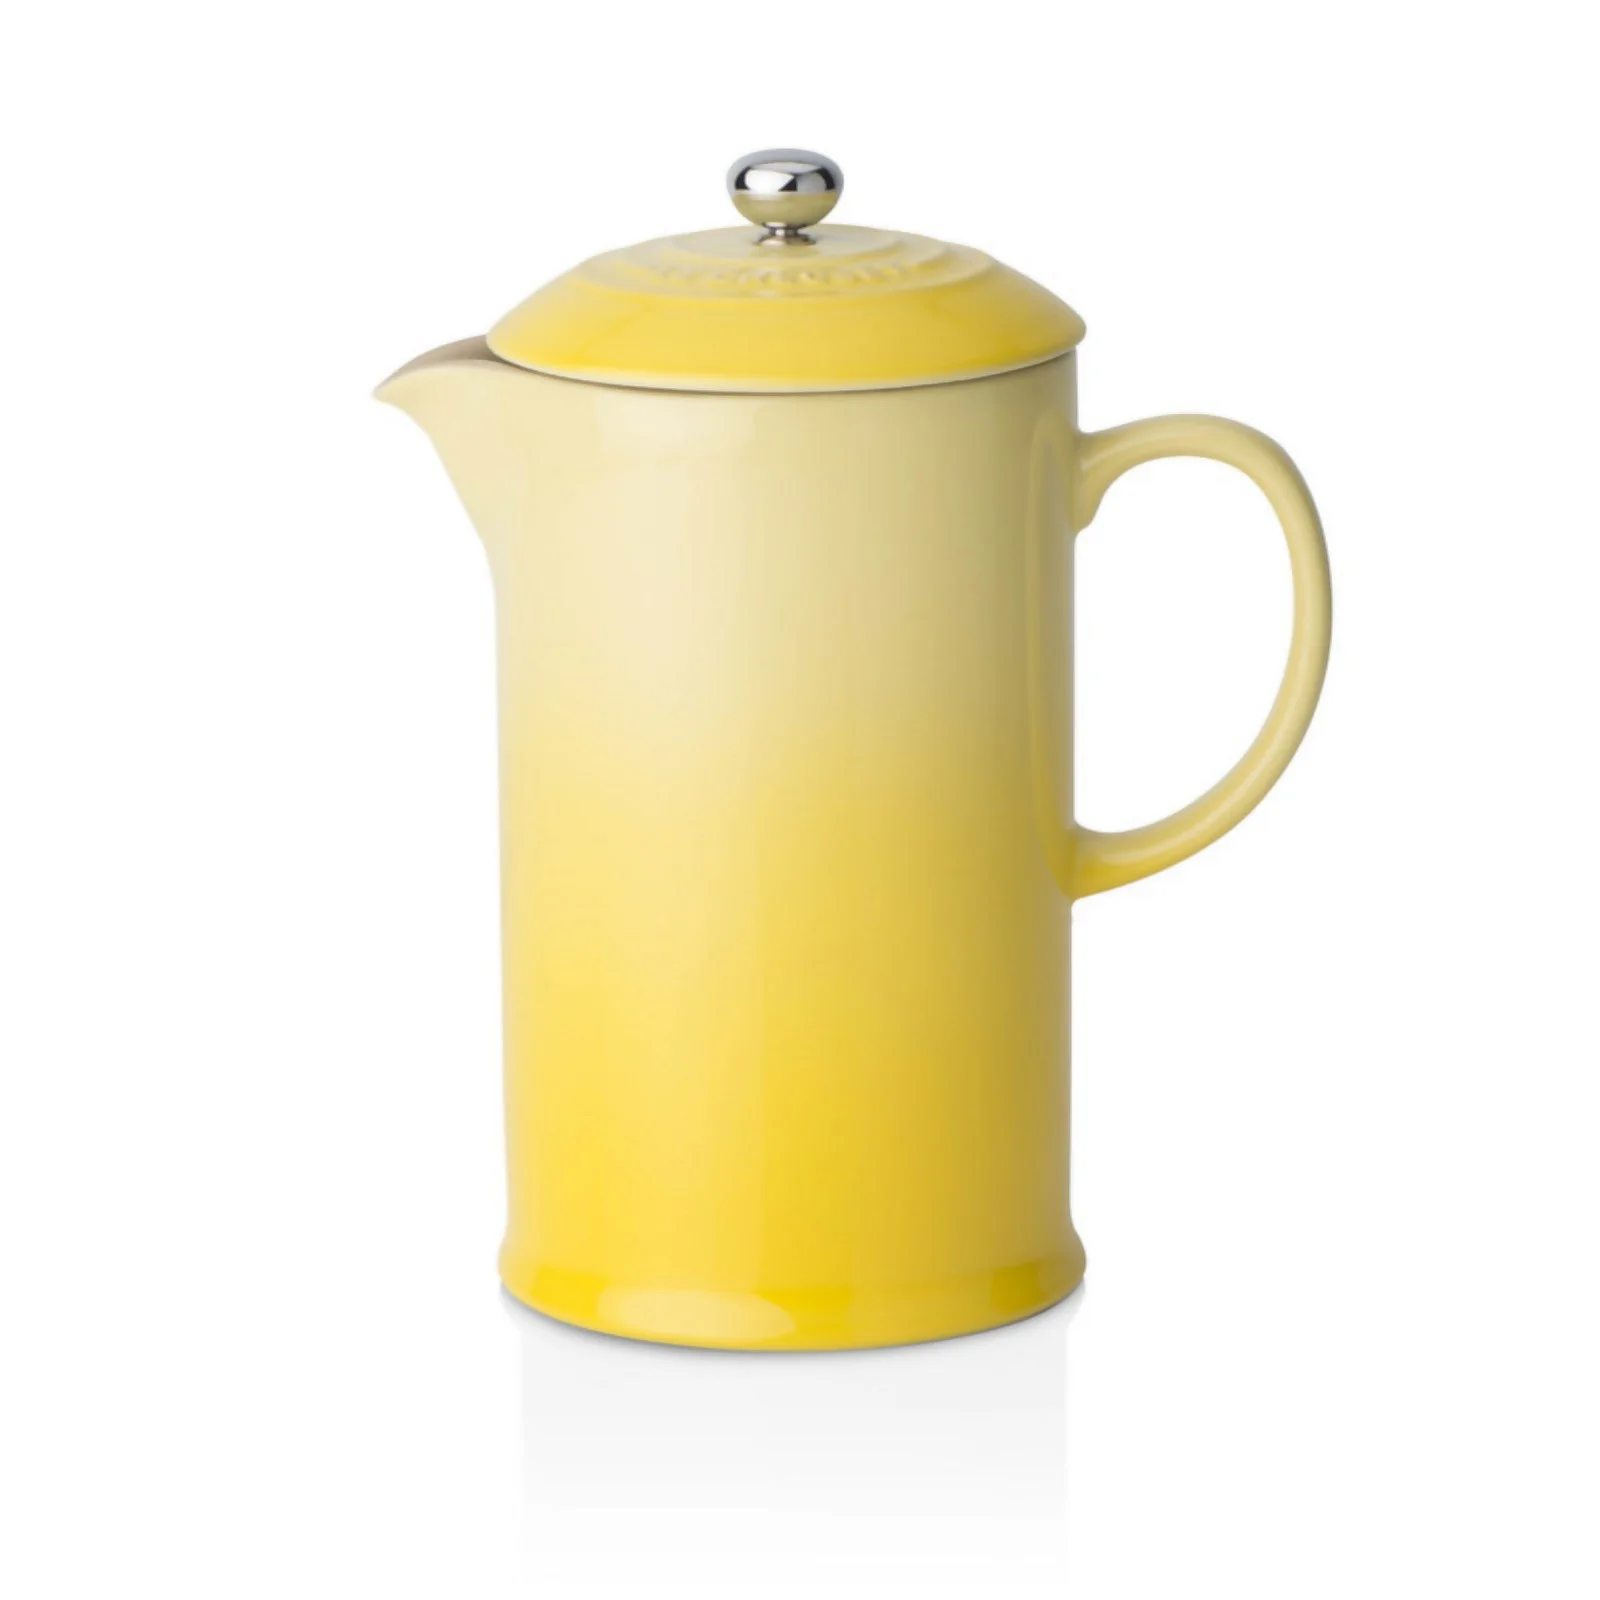 Le Creuset Stoneware Cafetiere Coffee Press - Soleil Yellow Image 1